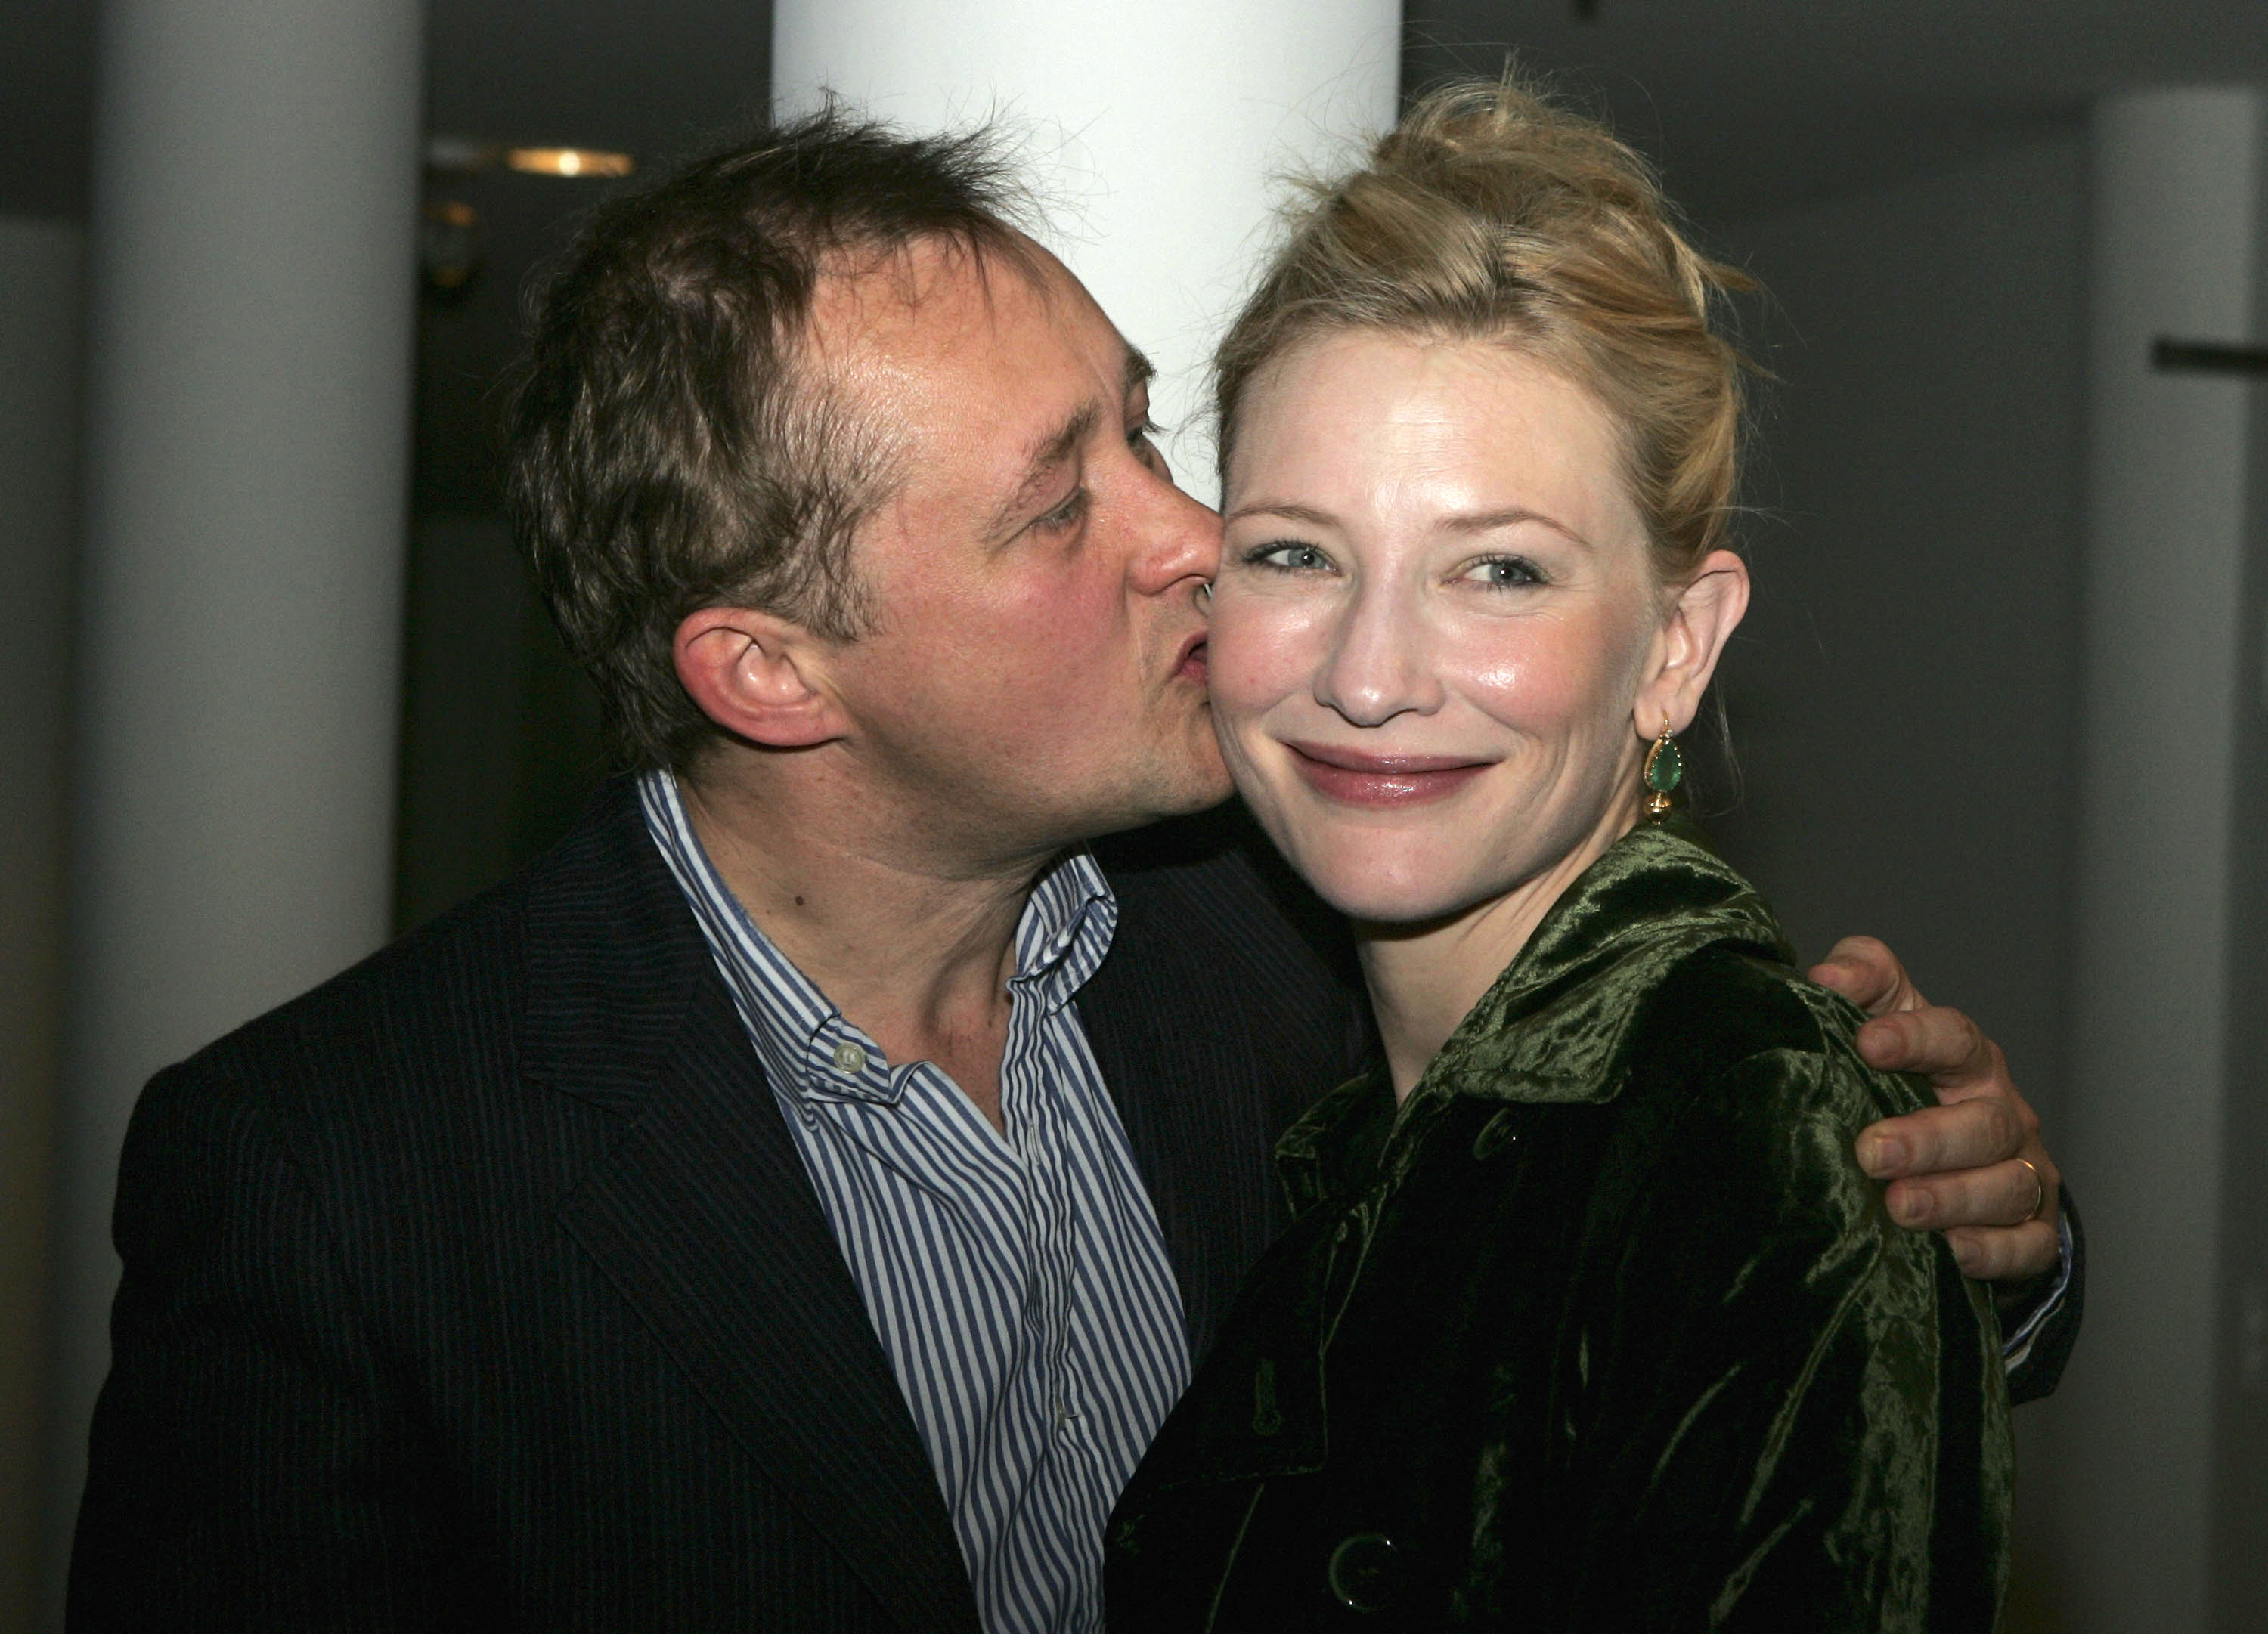 Andrew Upton kissing Cate Blanchett during the opening night party for "Hedda Gabler" on July 27, 2004, in Sydney, Australia | Source: Getty Images